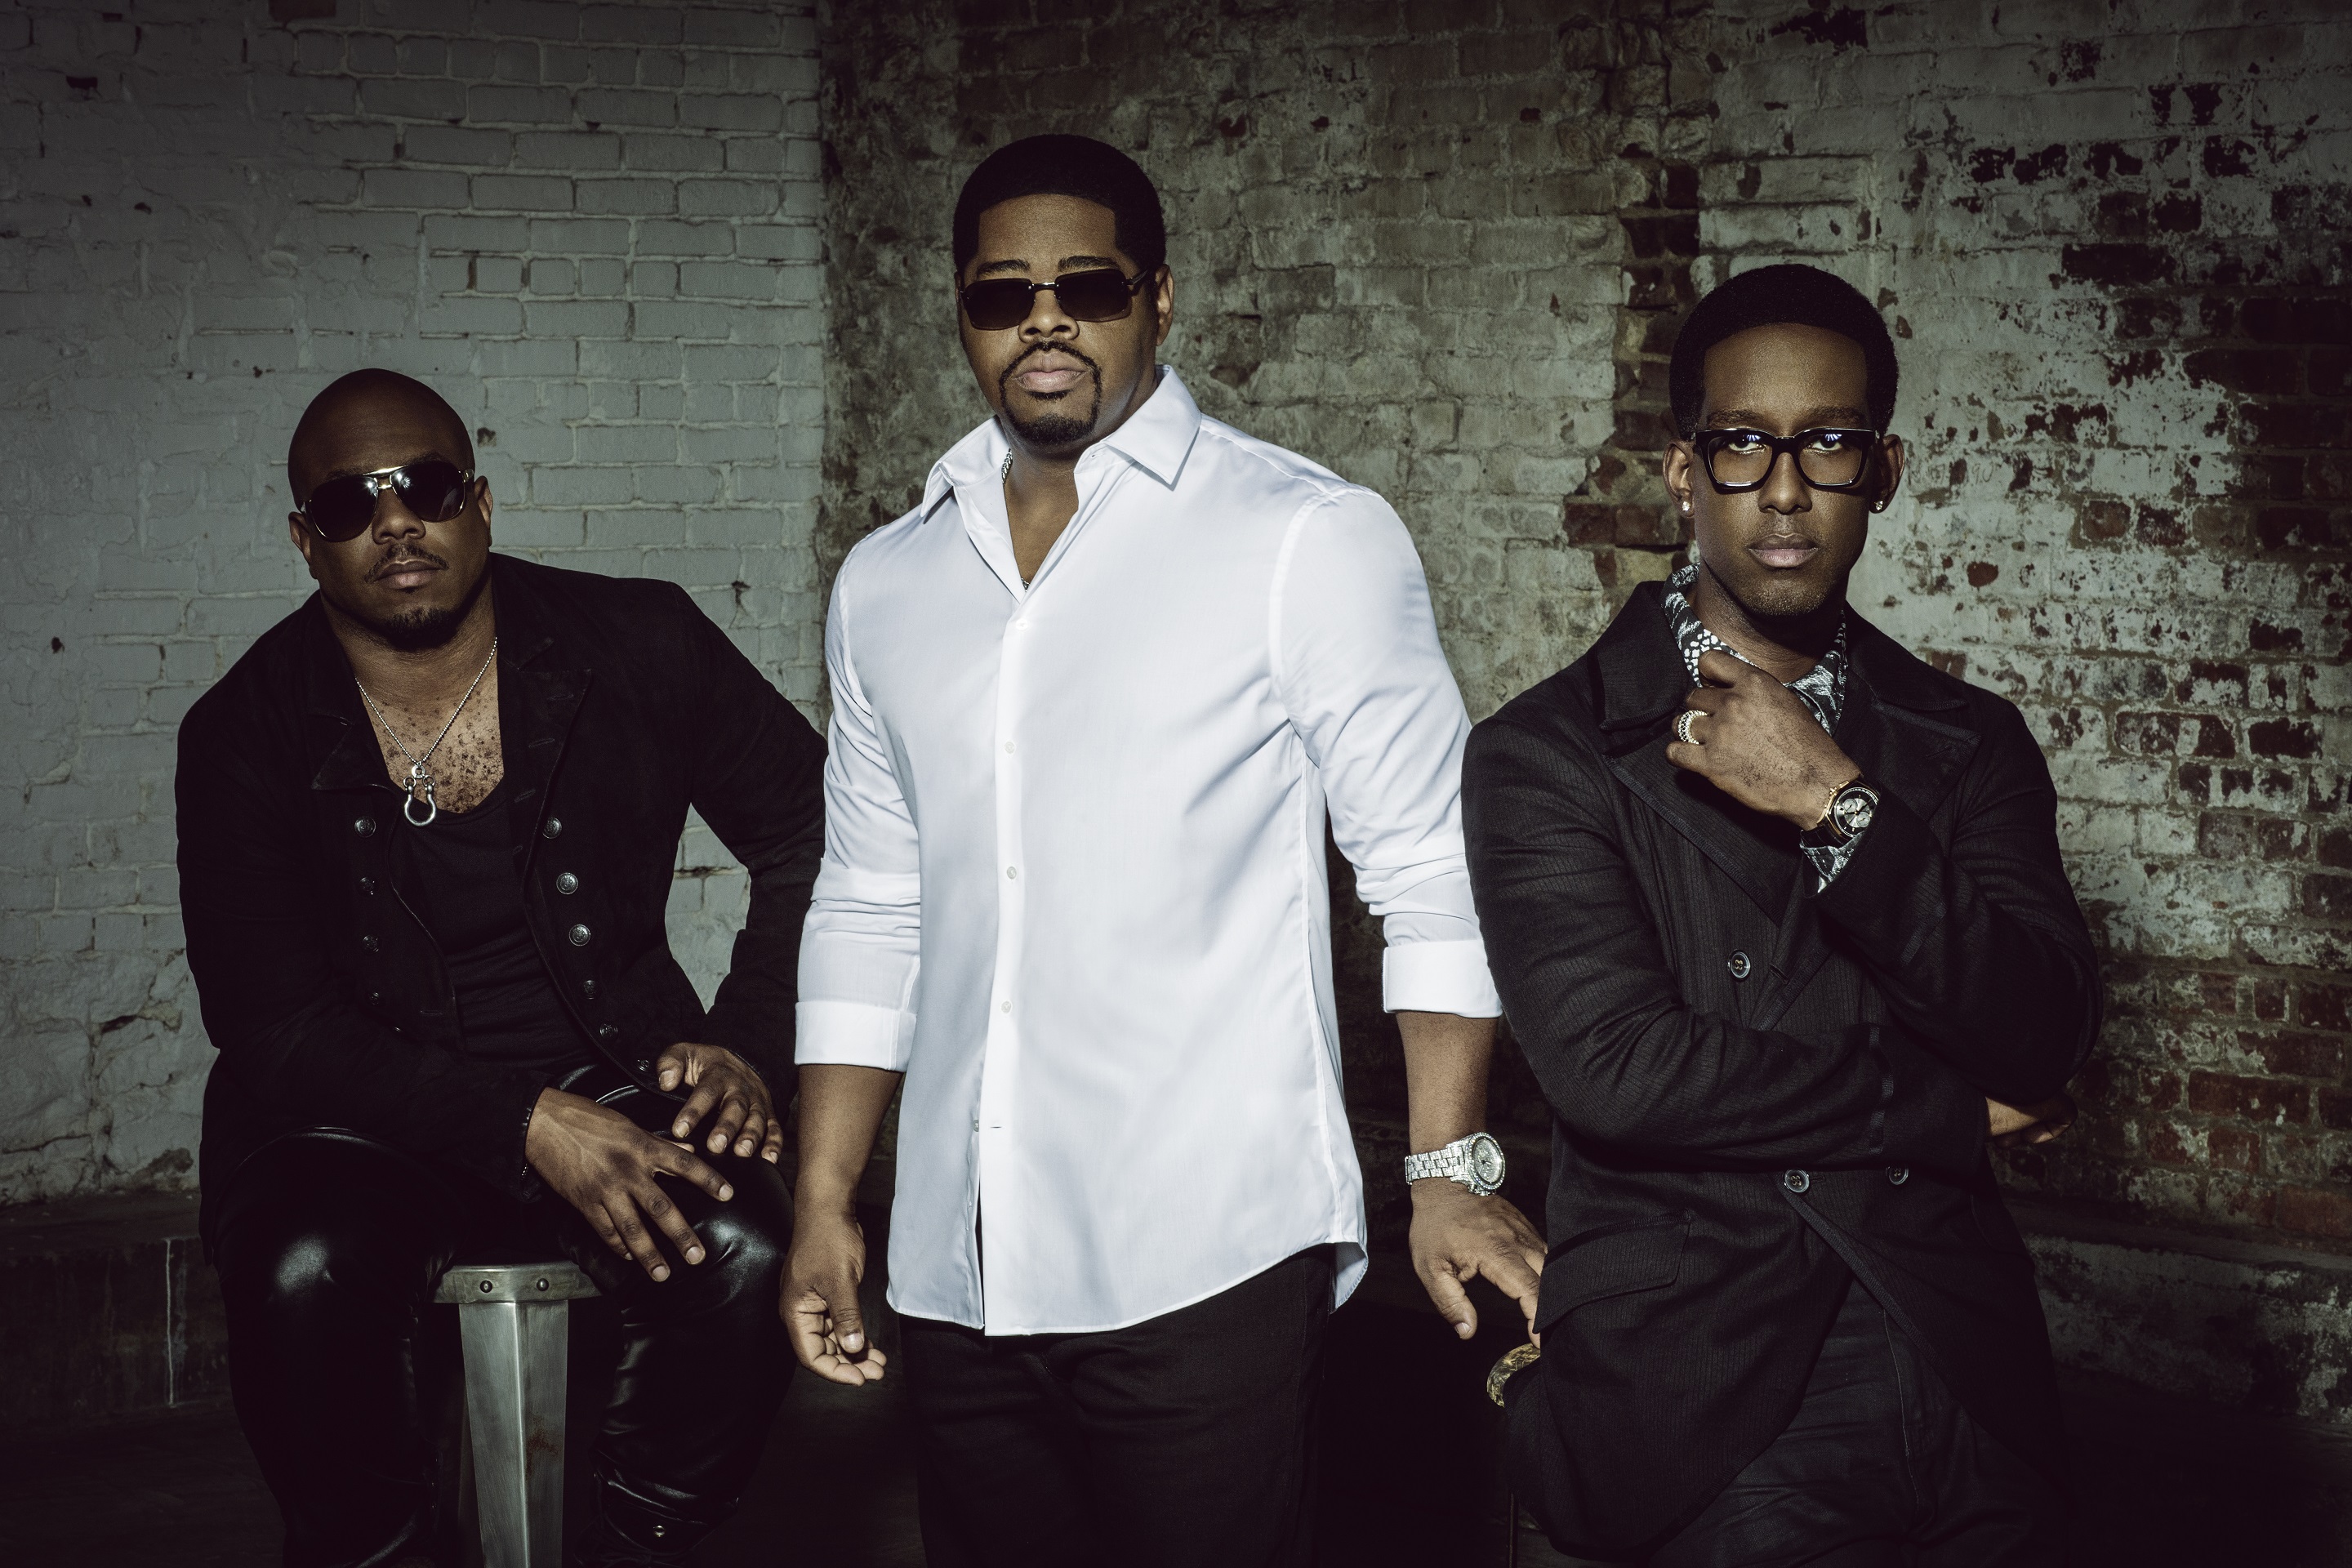 Boyz II Men teaming up with St. Louis Symphony Orchestra for night of R&B | www.bagssaleusa.com